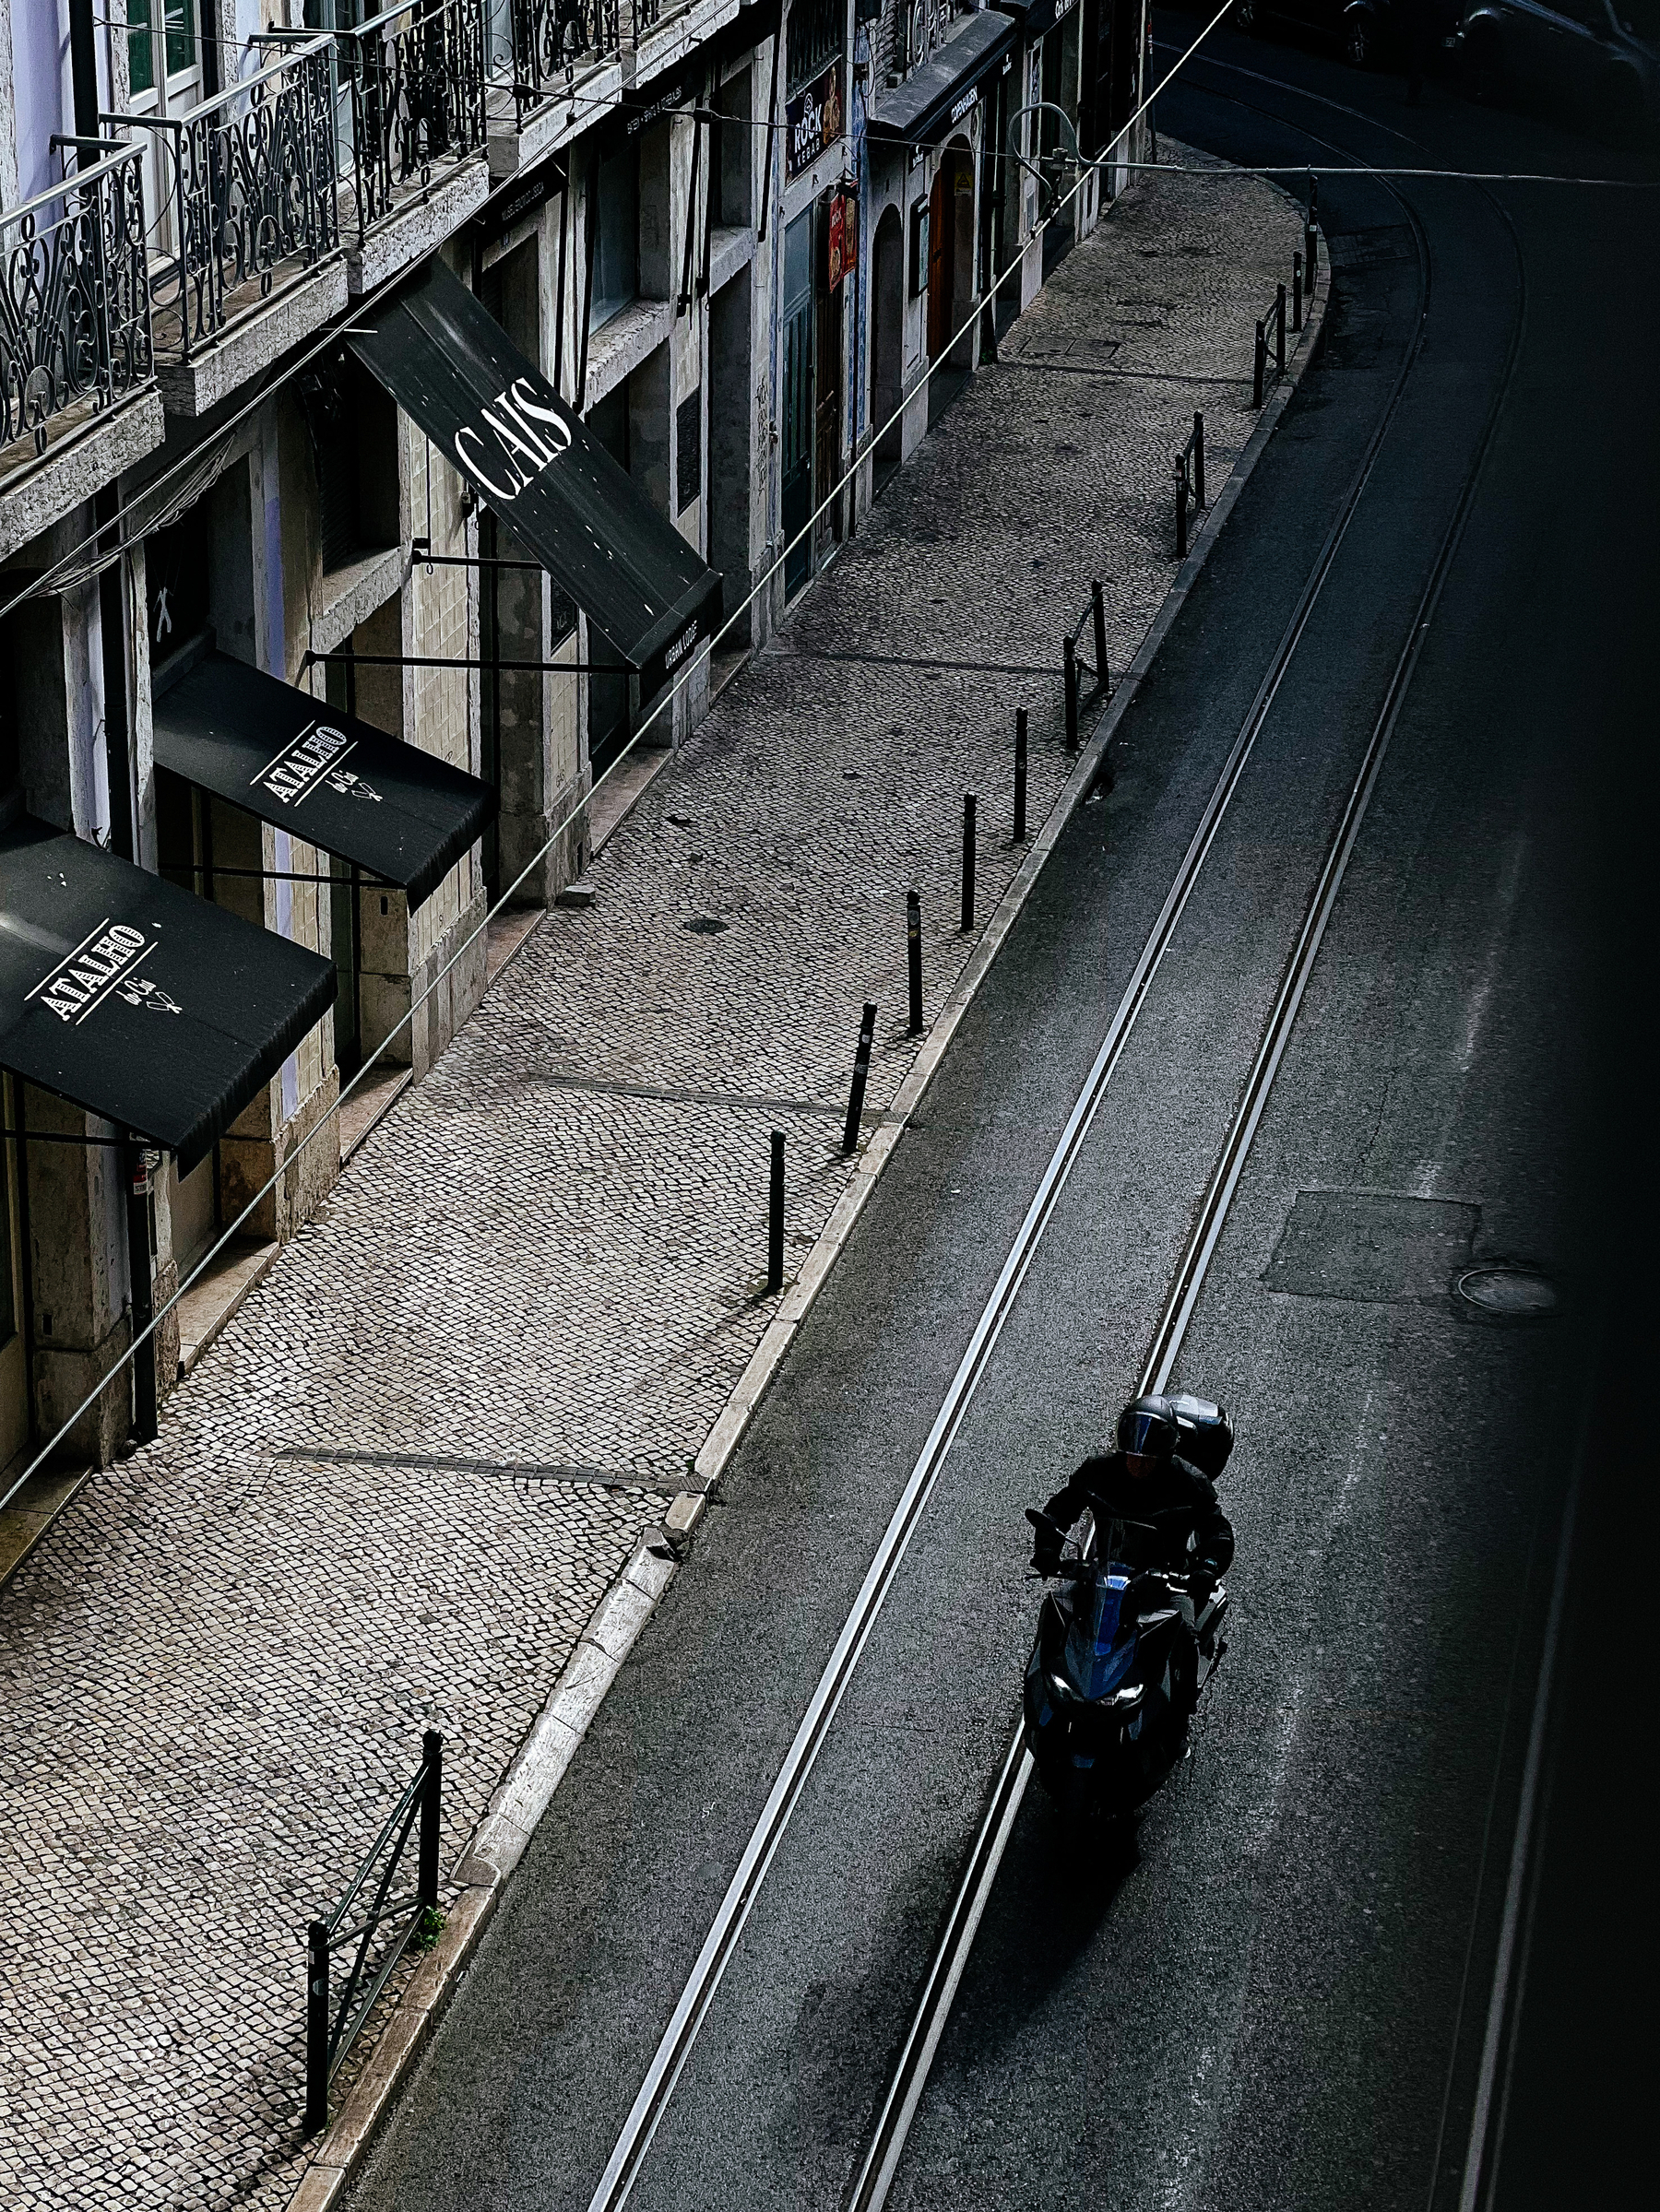 Looking down, a motorcycle rides on a street with tram tracks. 